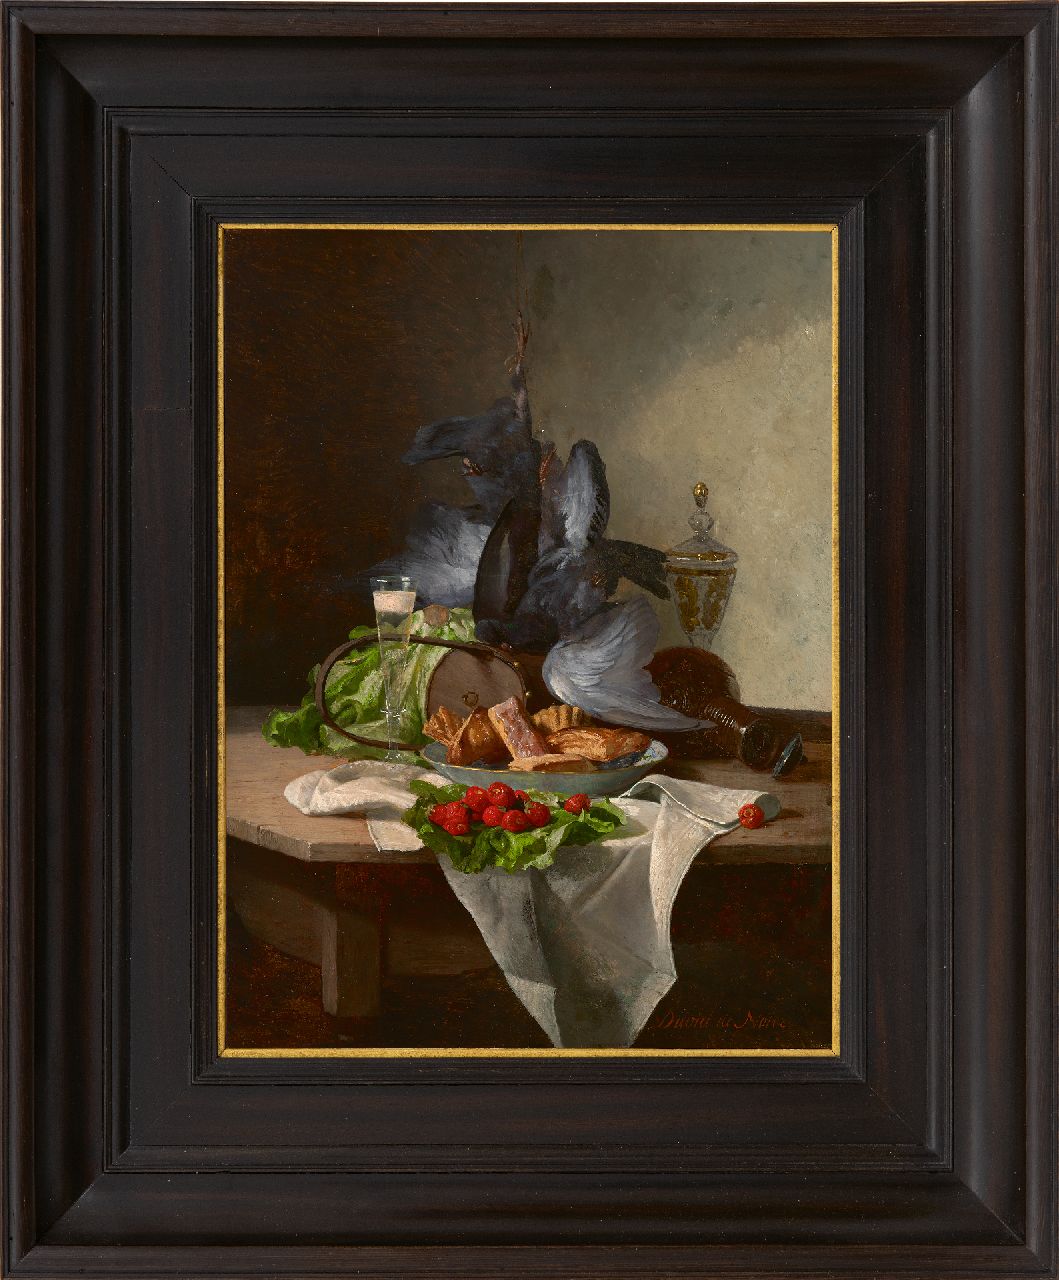 Noter D.E.J. de | 'David' Emile Joseph de Noter | Paintings offered for sale | A still life with vegetables, pie and game, oil on panel 30.4 x 22.8 cm, signed l.r.